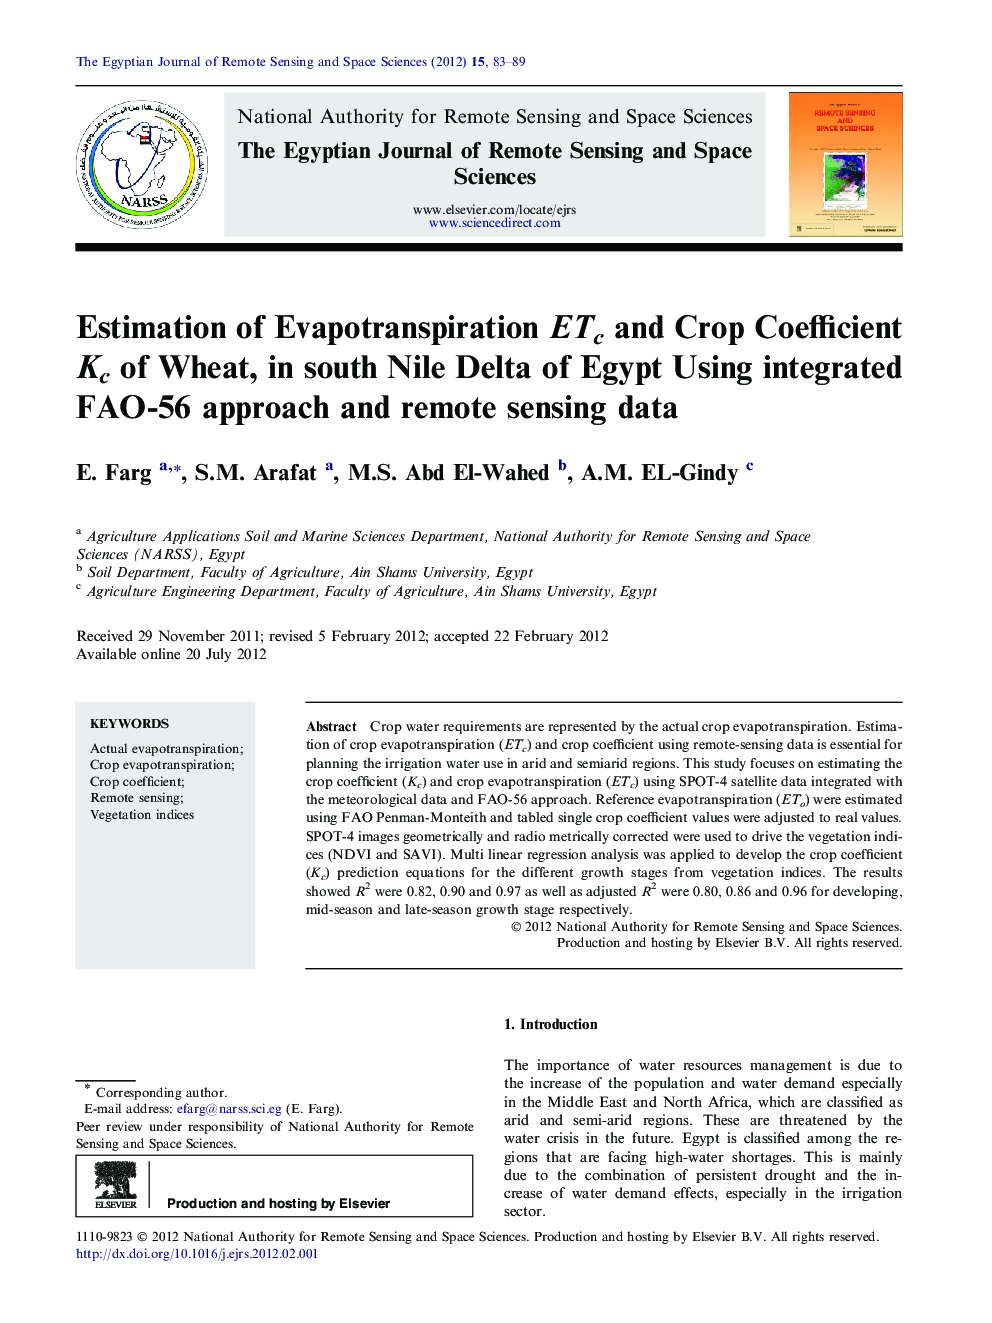 Estimation of Evapotranspiration ETc and Crop Coefficient Kc of Wheat, in south Nile Delta of Egypt Using integrated FAO-56 approach and remote sensing data 